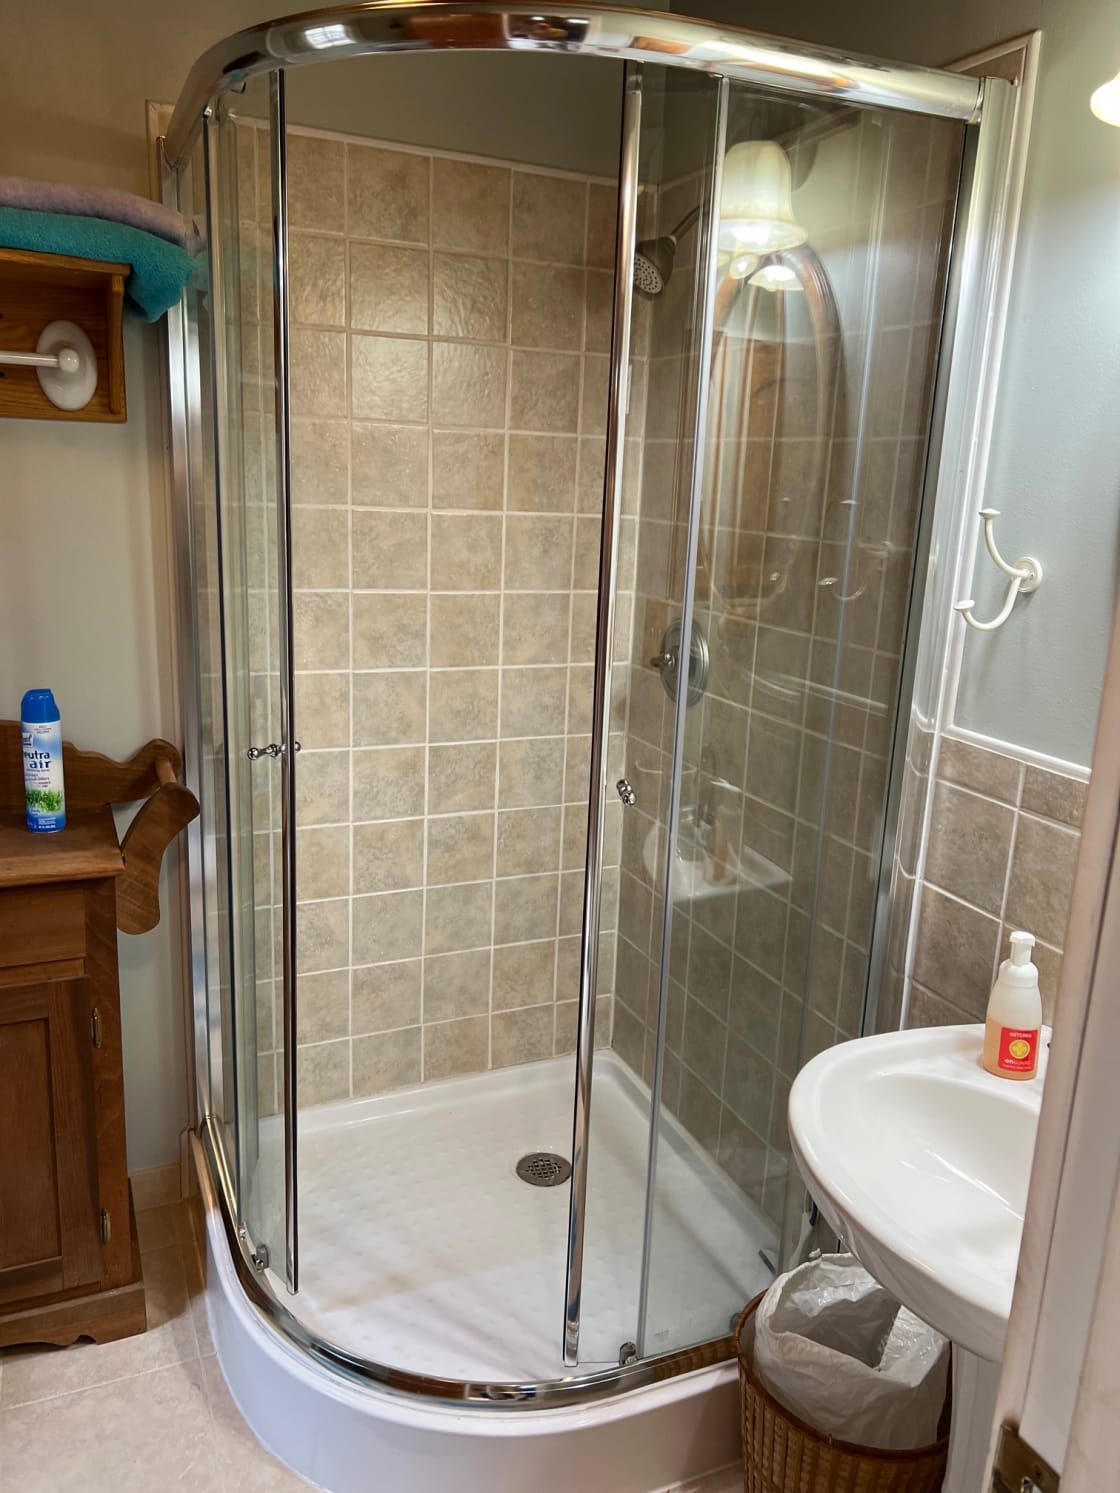 Bathroom showing shower and small sink